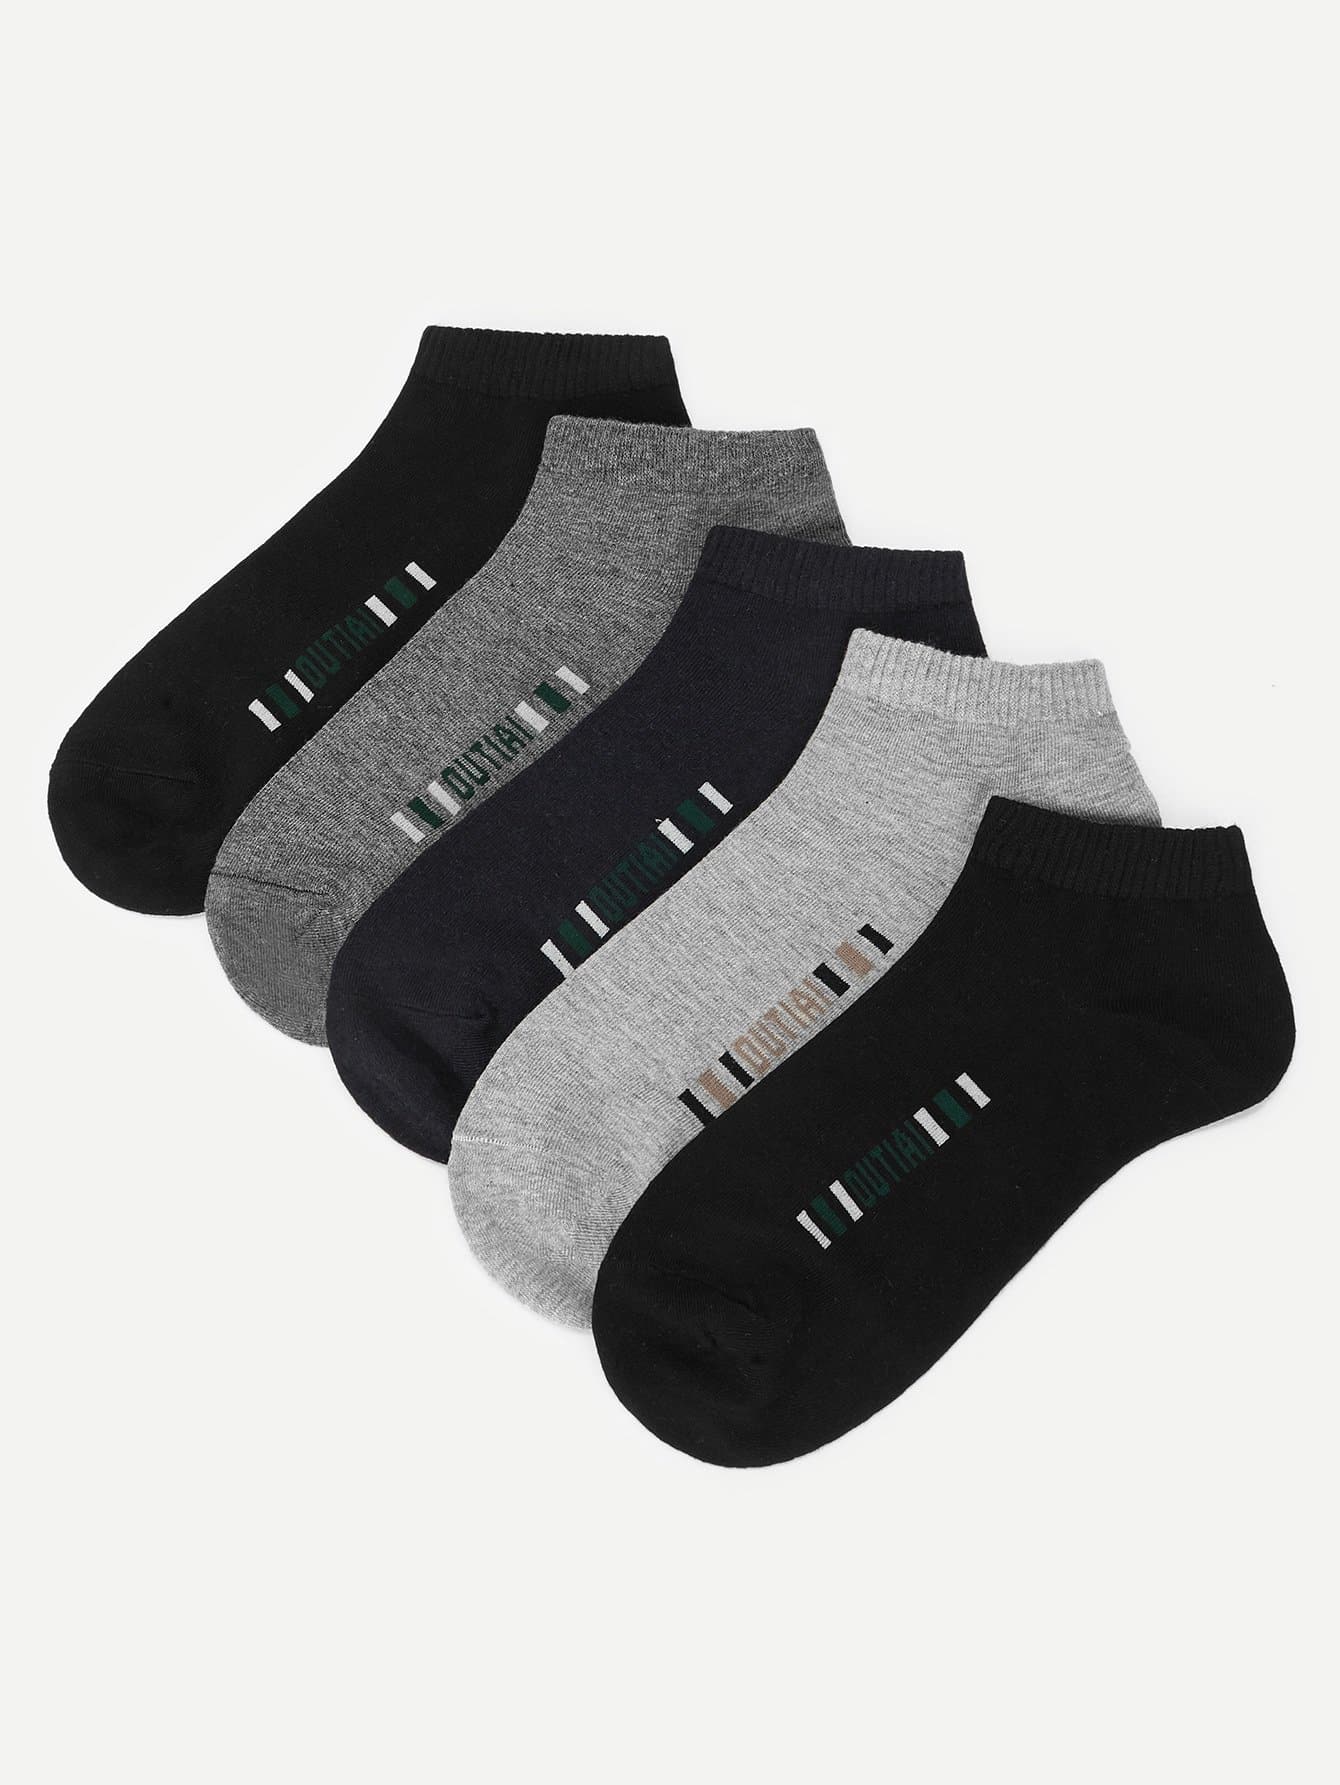 Cotton Letter Pattern Ankle Socks 5pairs